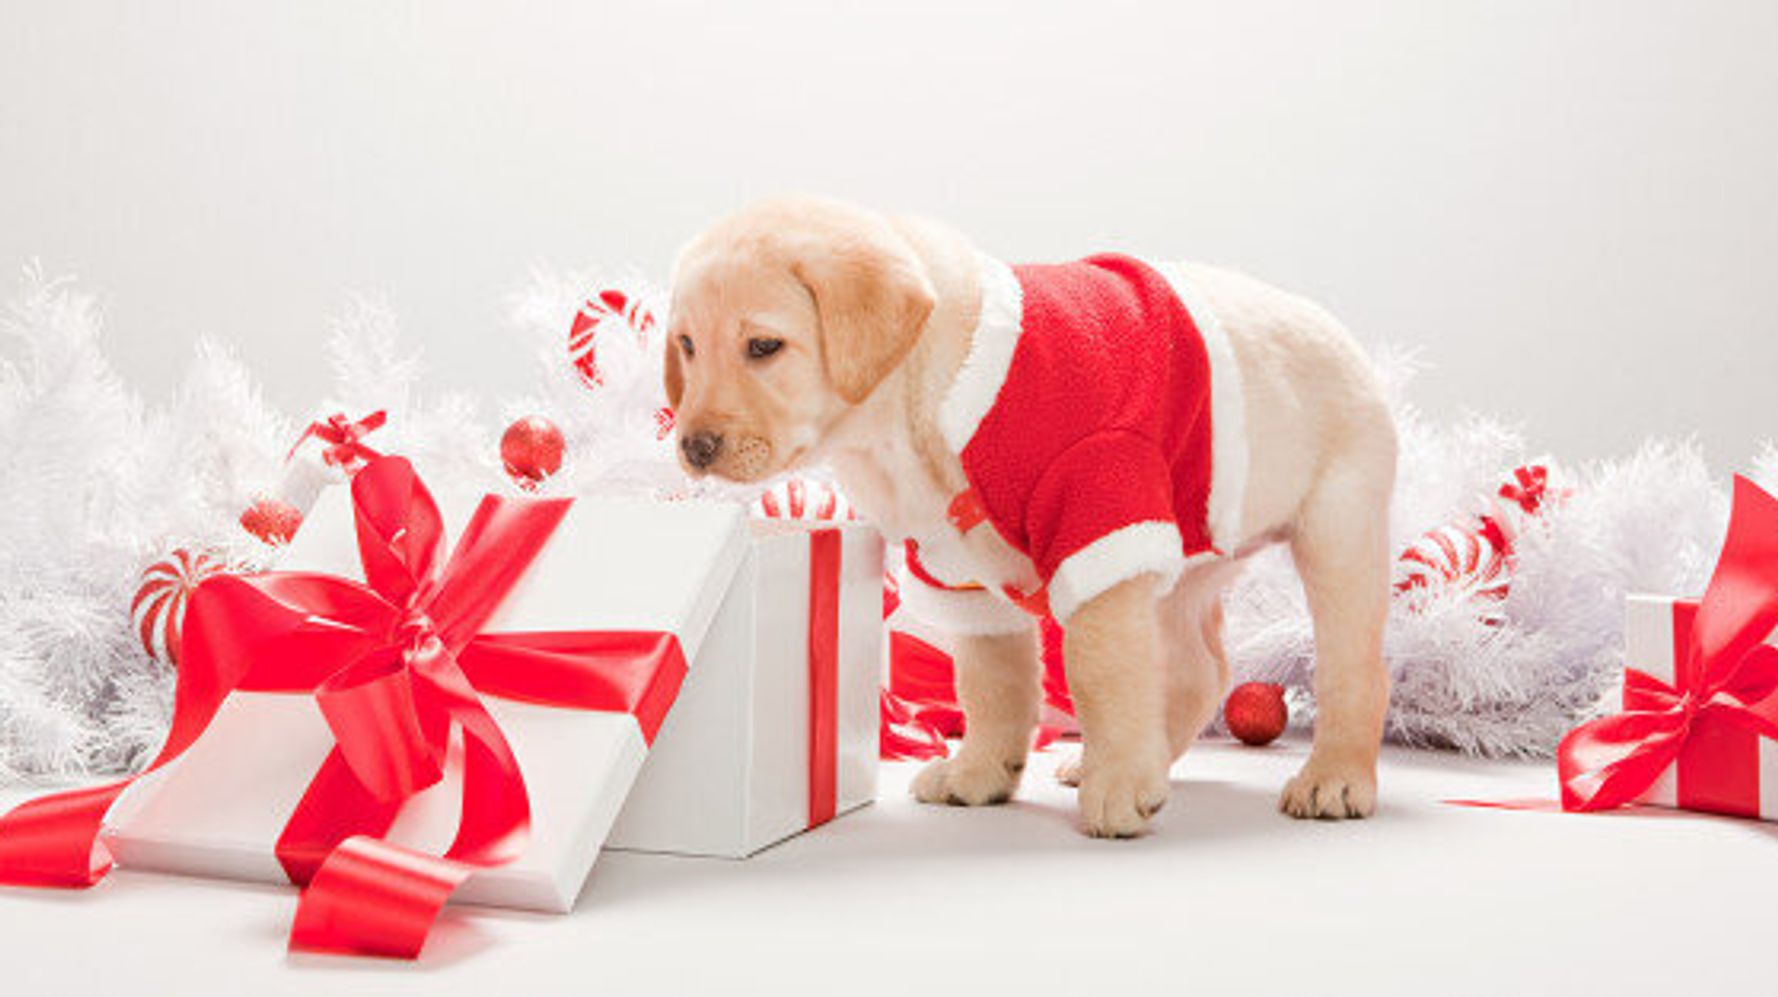 25 Cute Christmas Gifts for Dogs, Cats & Owners - King Duke's